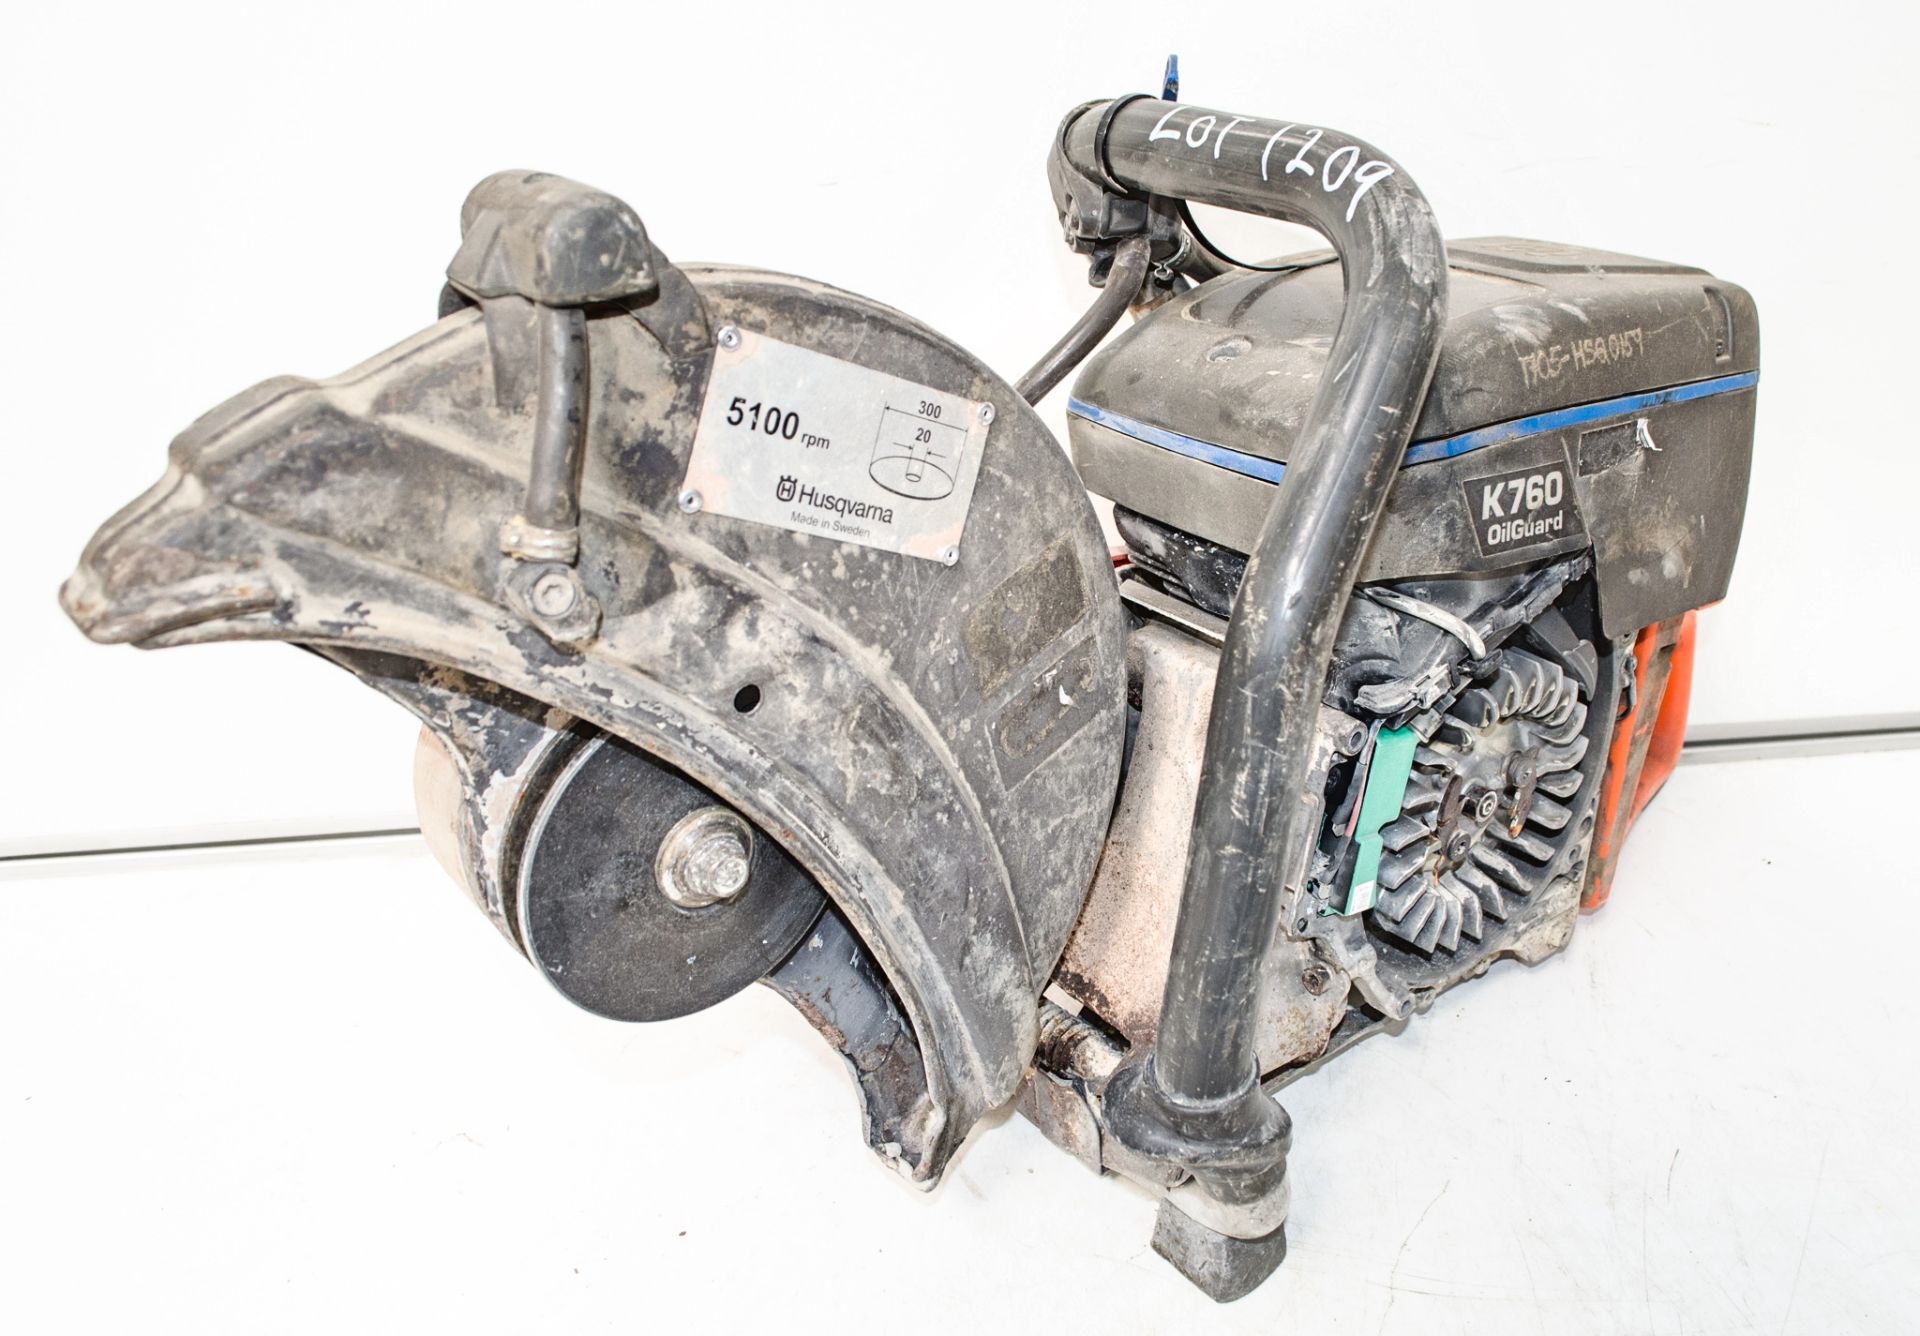 Husqvarna K760 petrol driven cut off saw ** Pull cord assembly and cover missing ** 1705HSQ0159